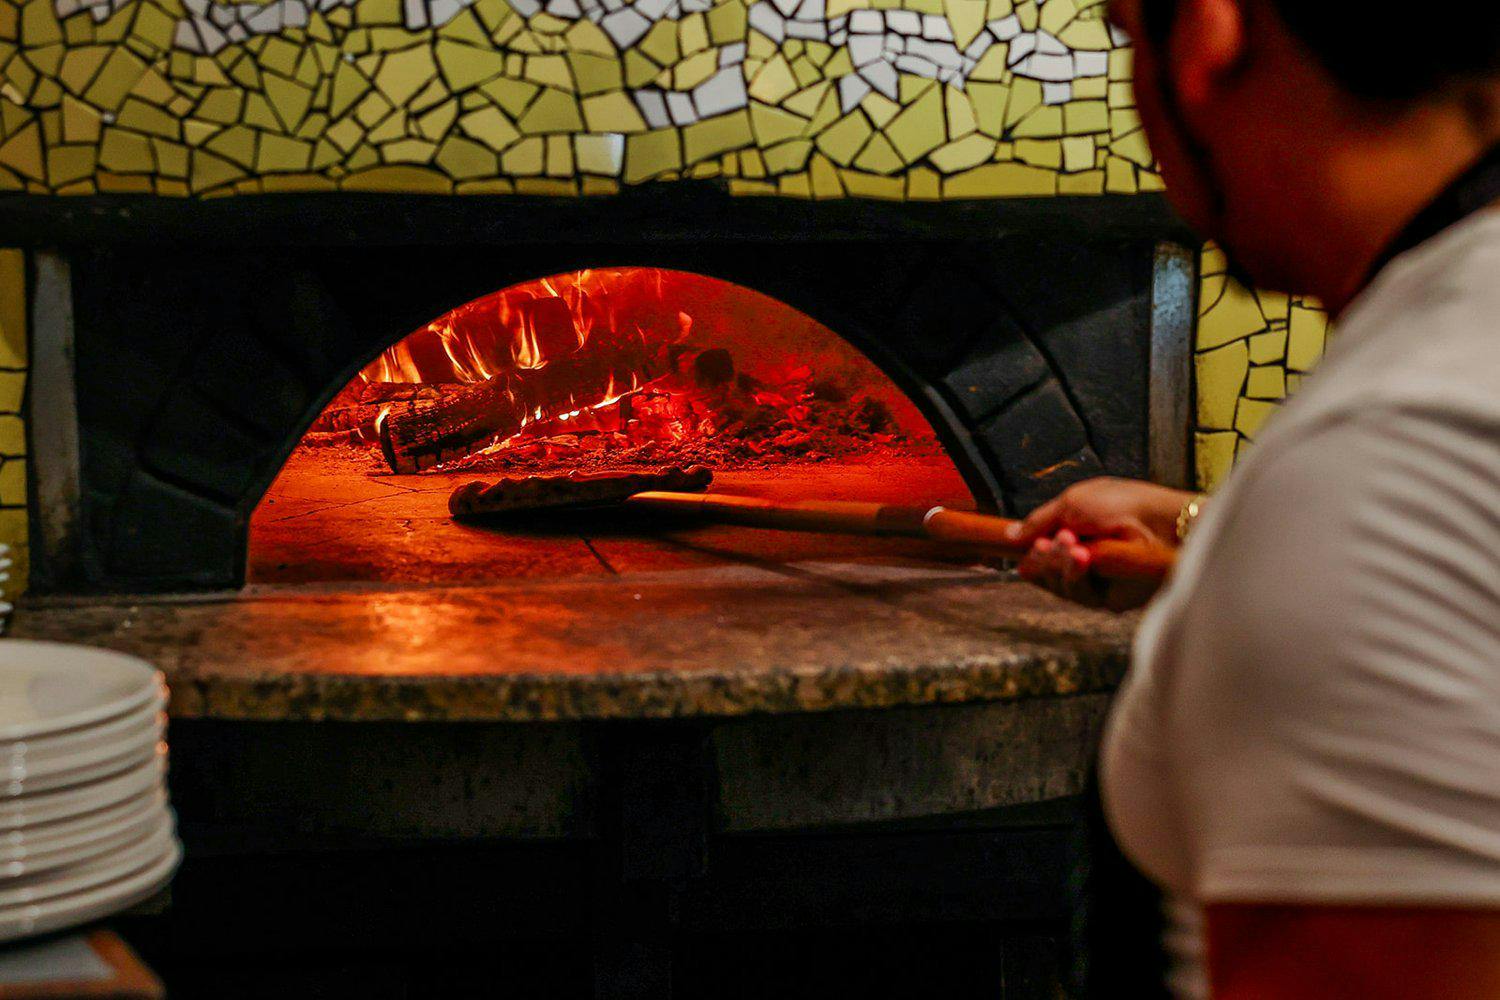 Wood oven pizza at Nick and Toni's fine Italian restaurant in the Hamptons